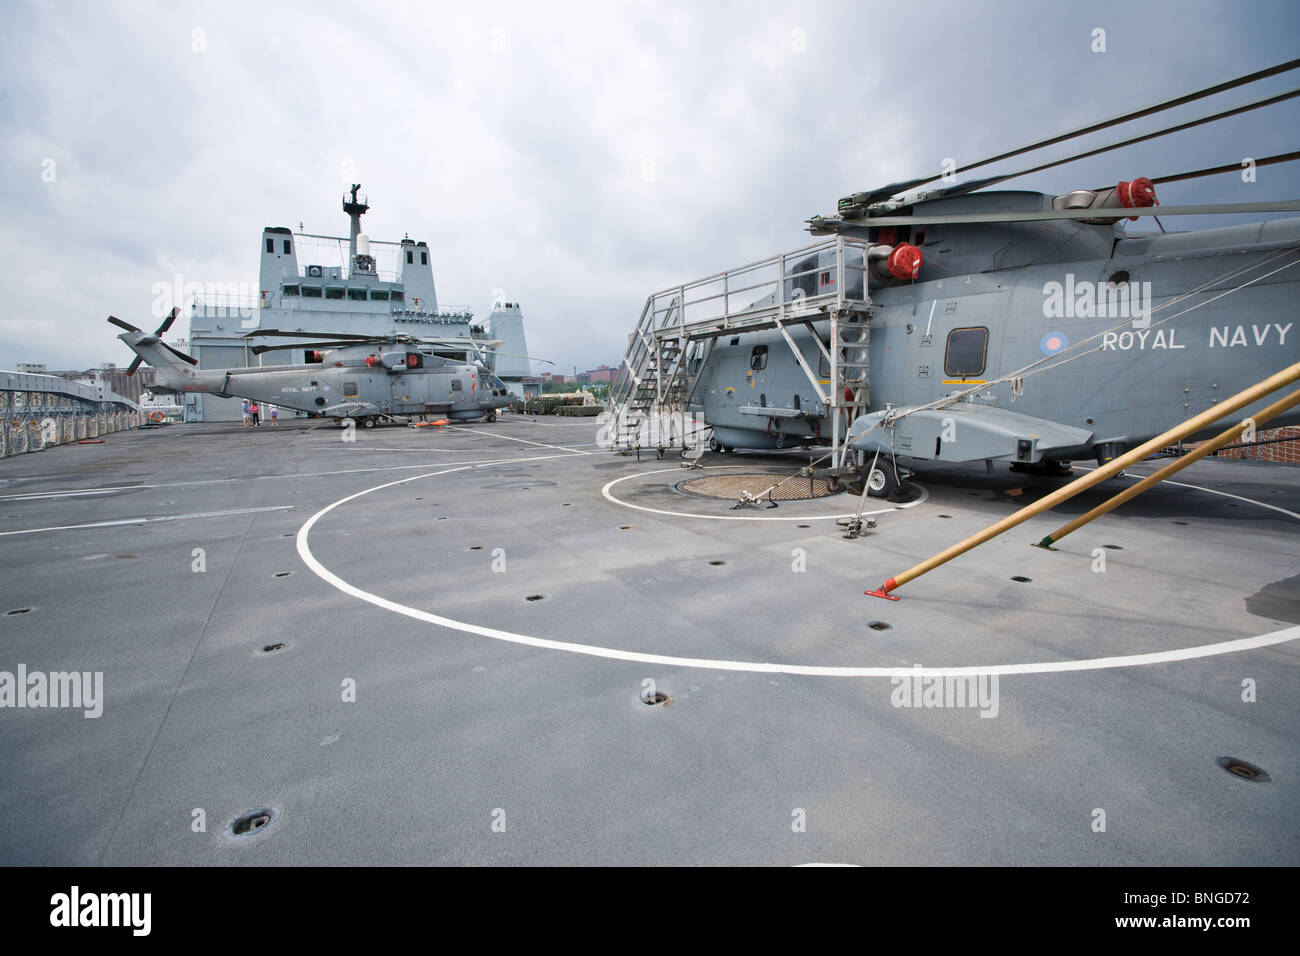 Two Royal Navy EH-101 Merlin helicopters on the flight deck of RFA FORT GEORGE. Stock Photo